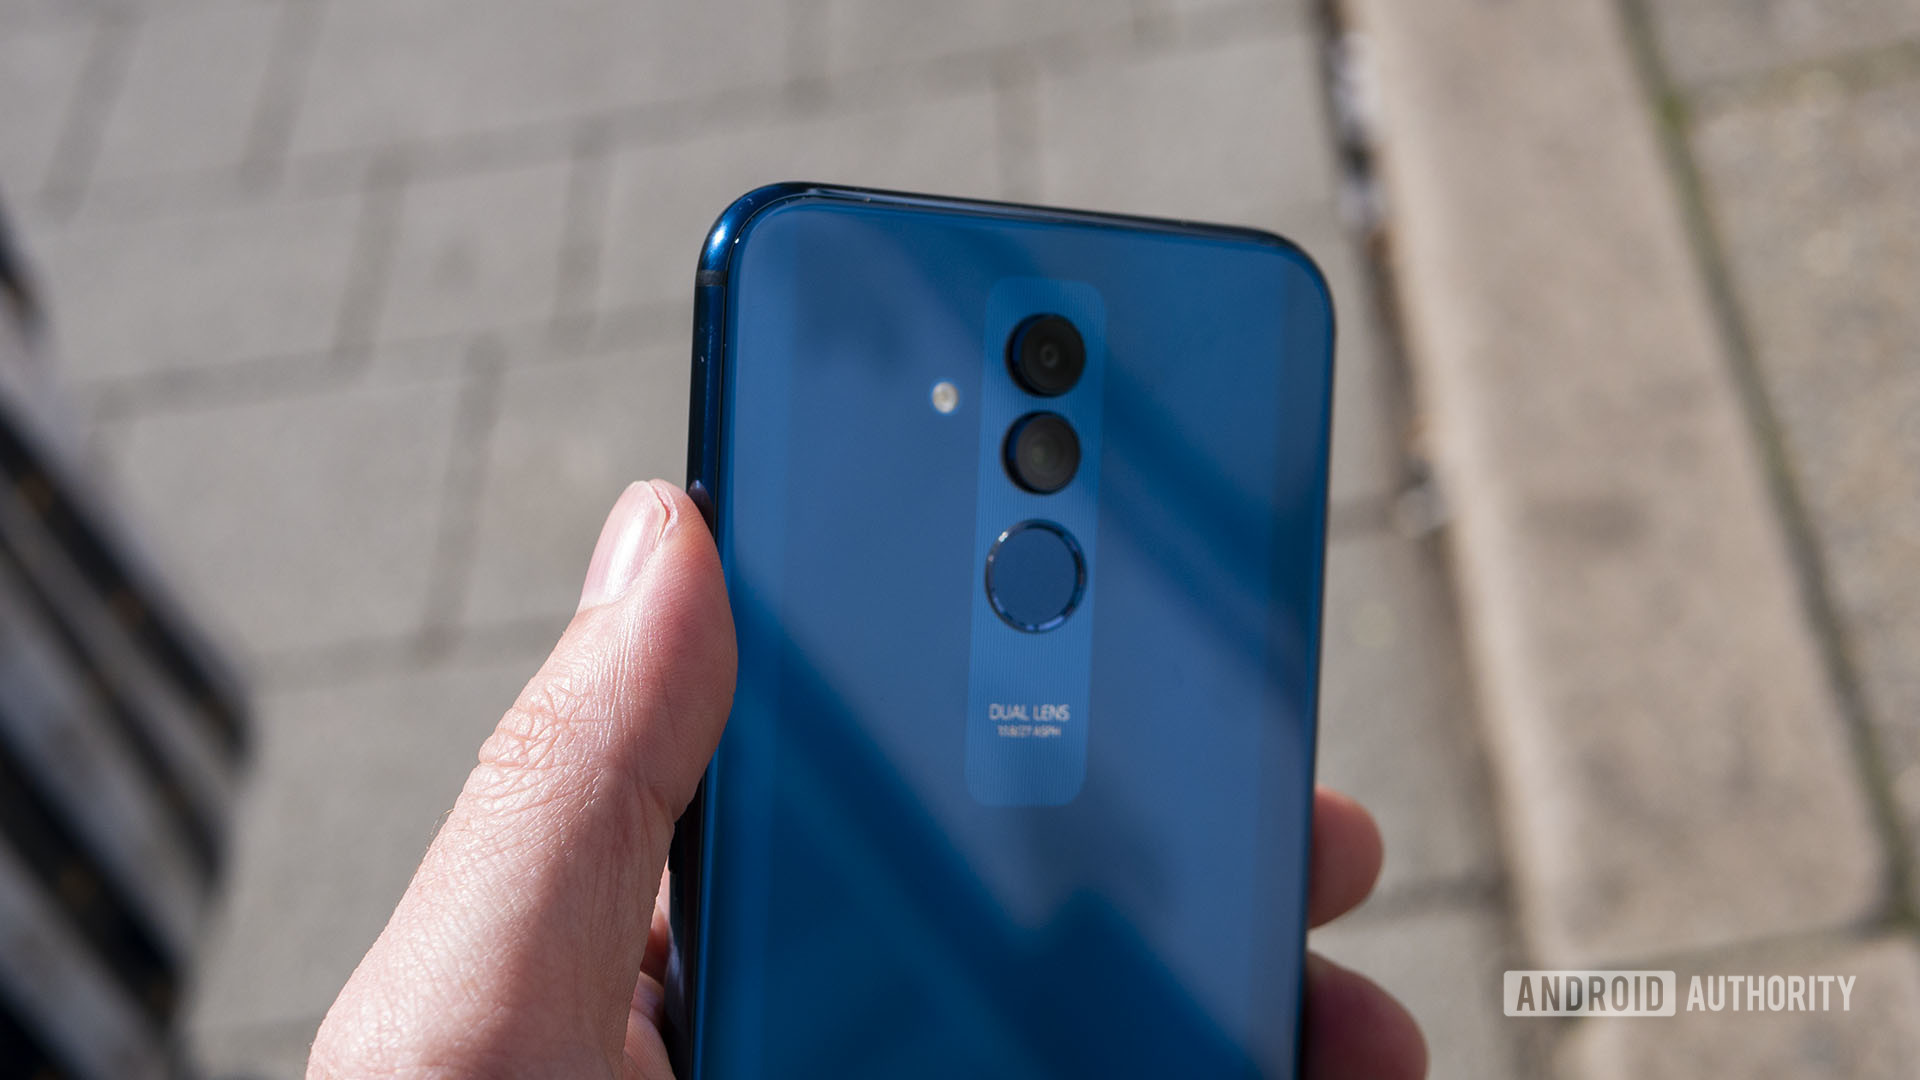 Christ grass Brighten Huawei Mate 20 Lite review: Not so smart - Android Authority